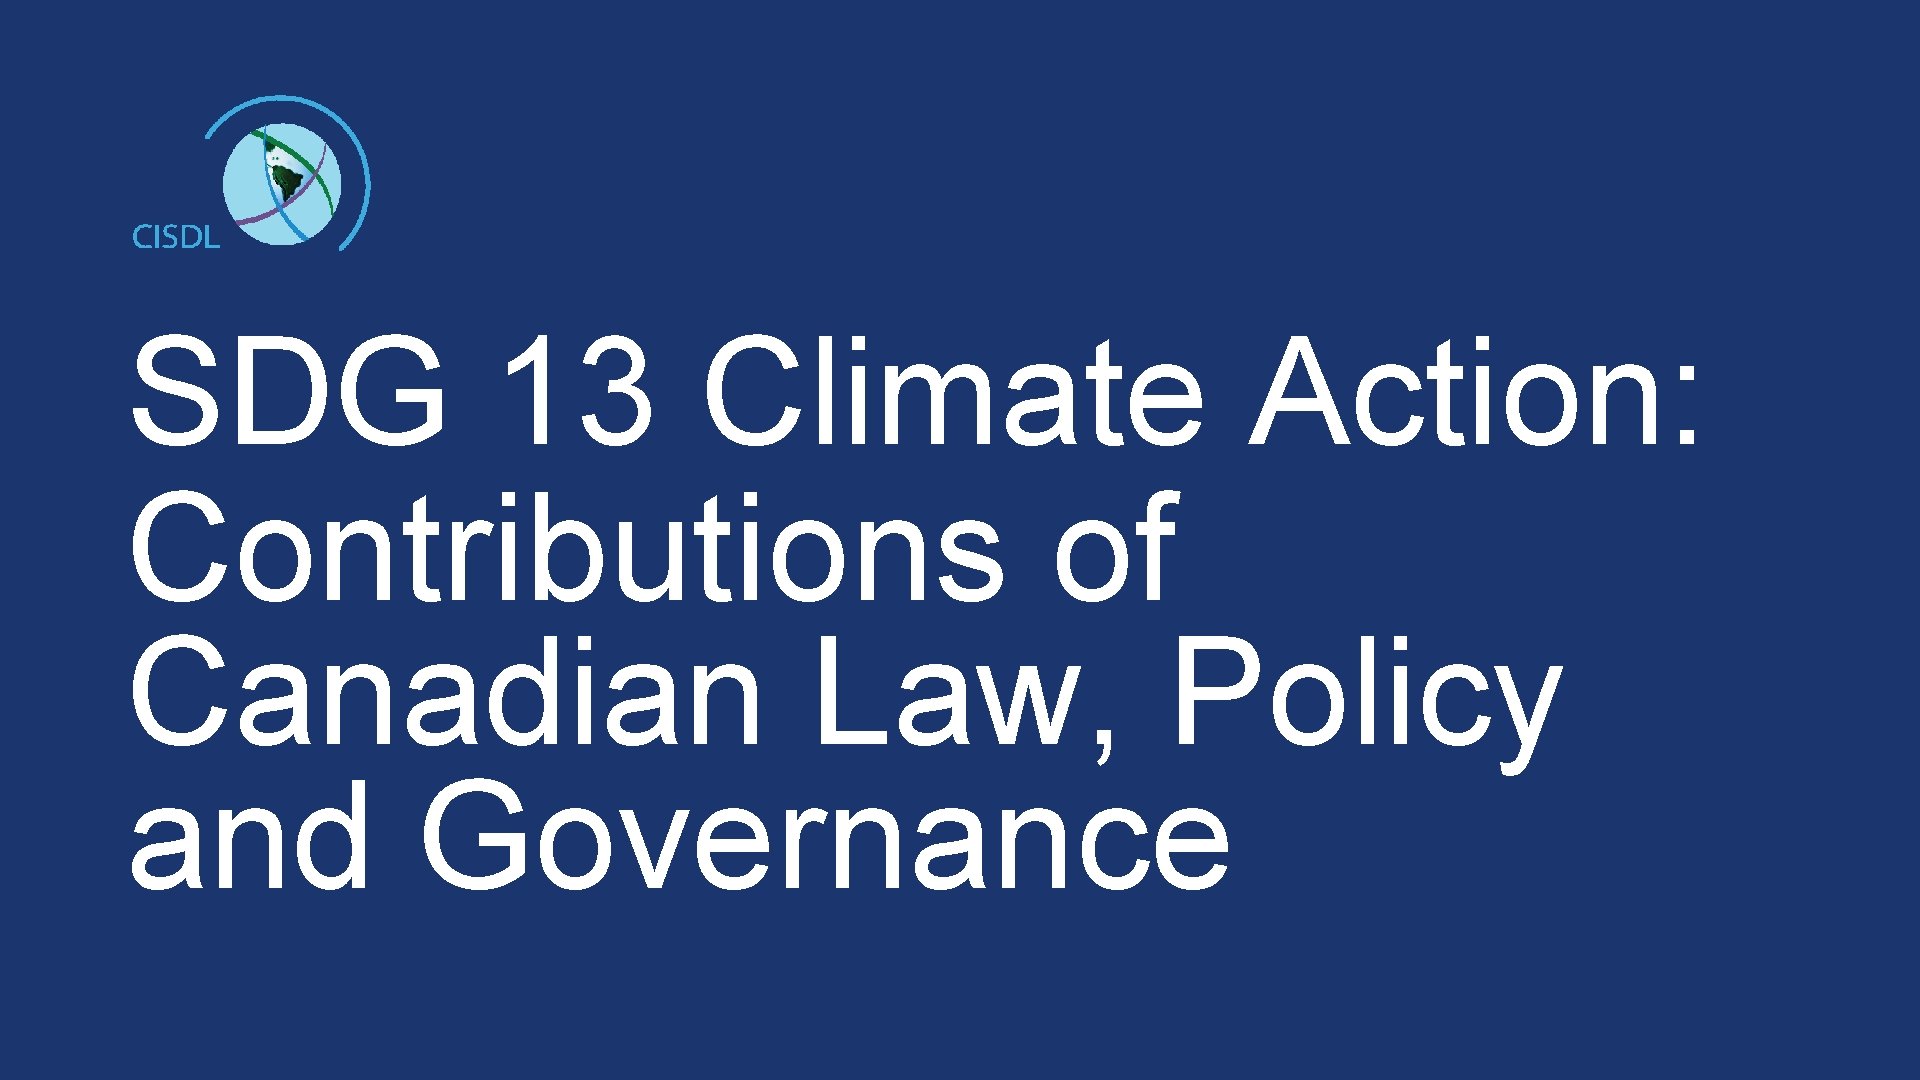 SDG 13 Climate Action: Contributions of Canadian Law, Policy and Governance 